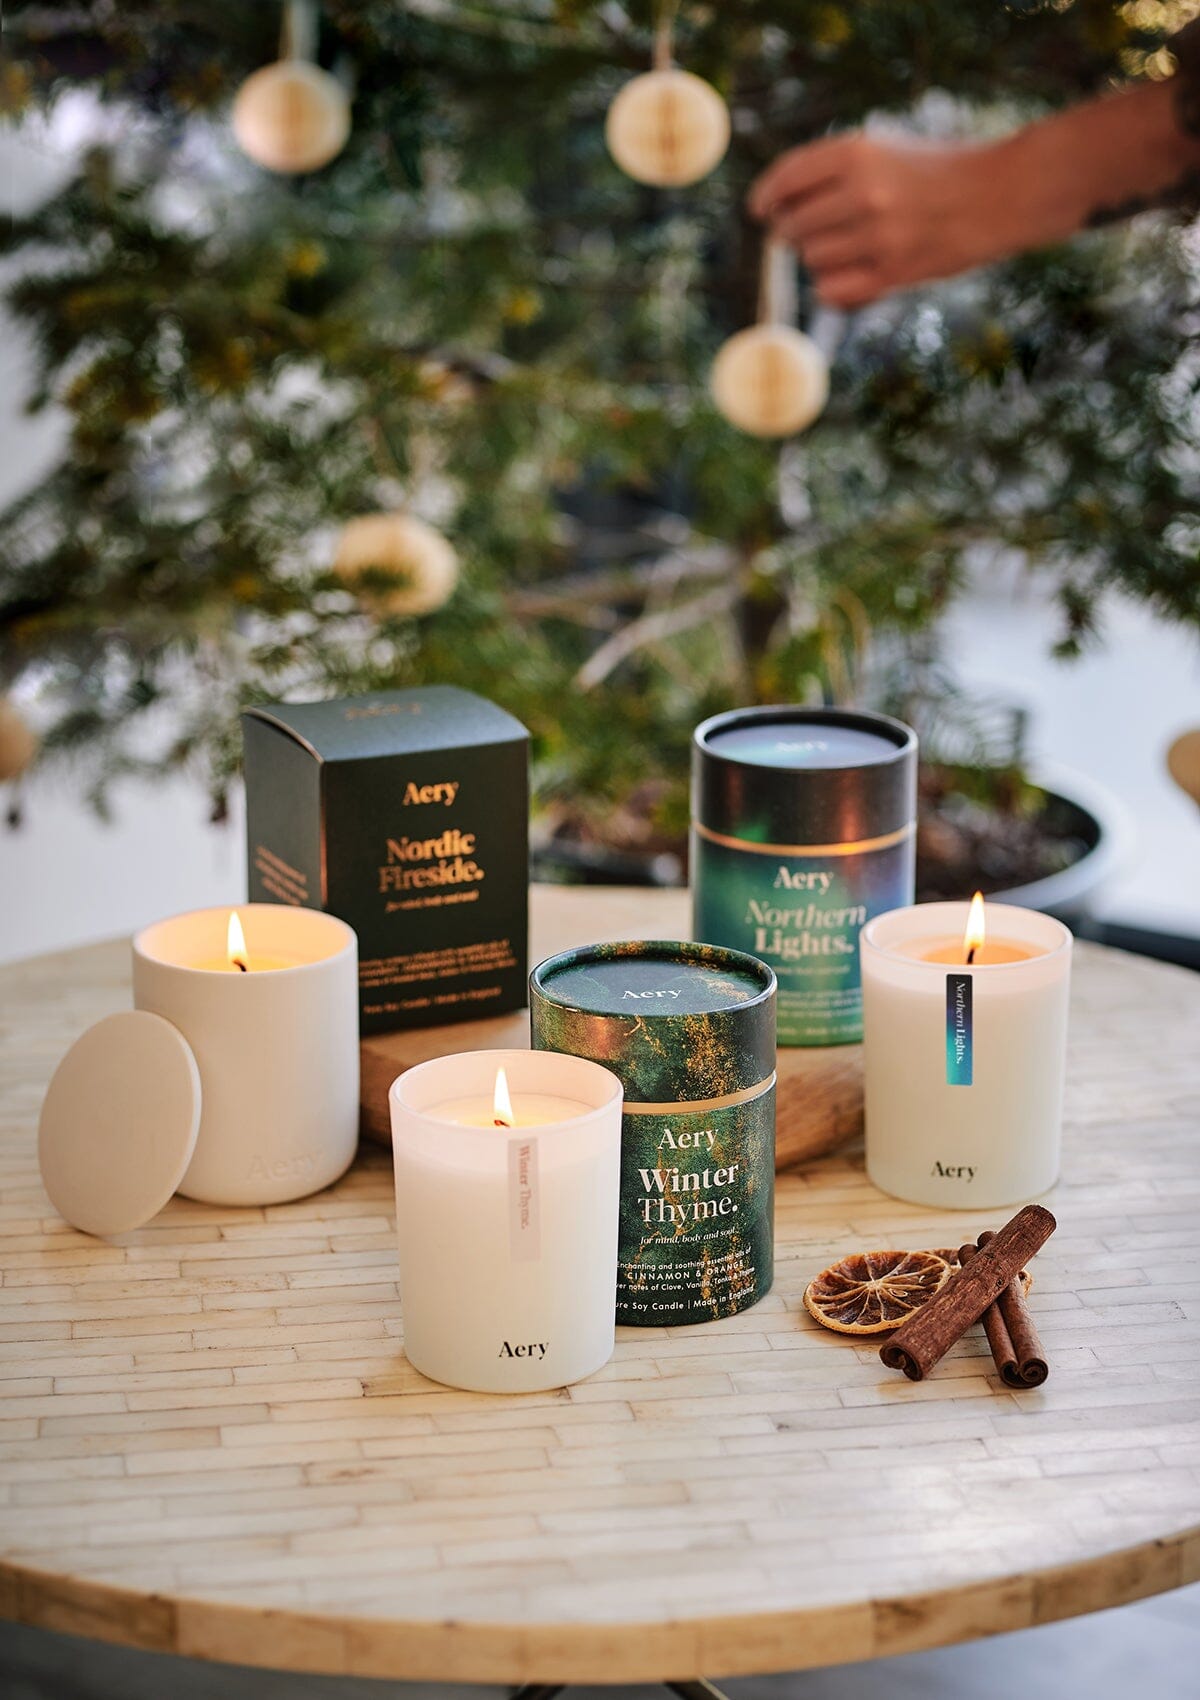 Winter Thyme Nordic Fireside and Northern Lights candles by Aery displayed next to product packaging placed on cream circle table in front of Christmas tree 